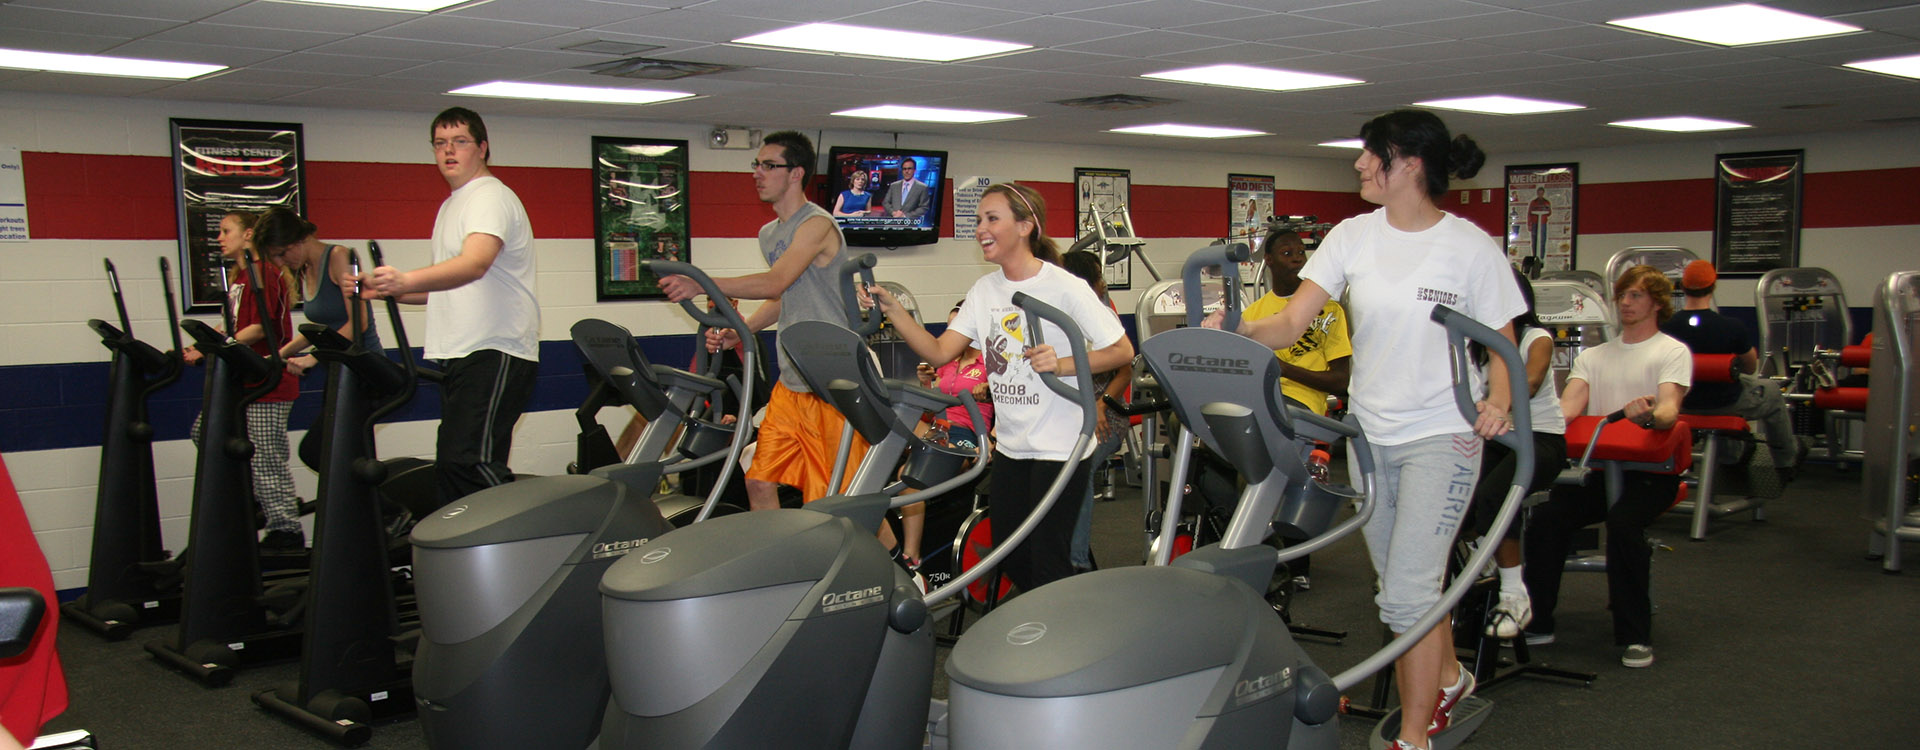 students running on treadmills in the fitness room